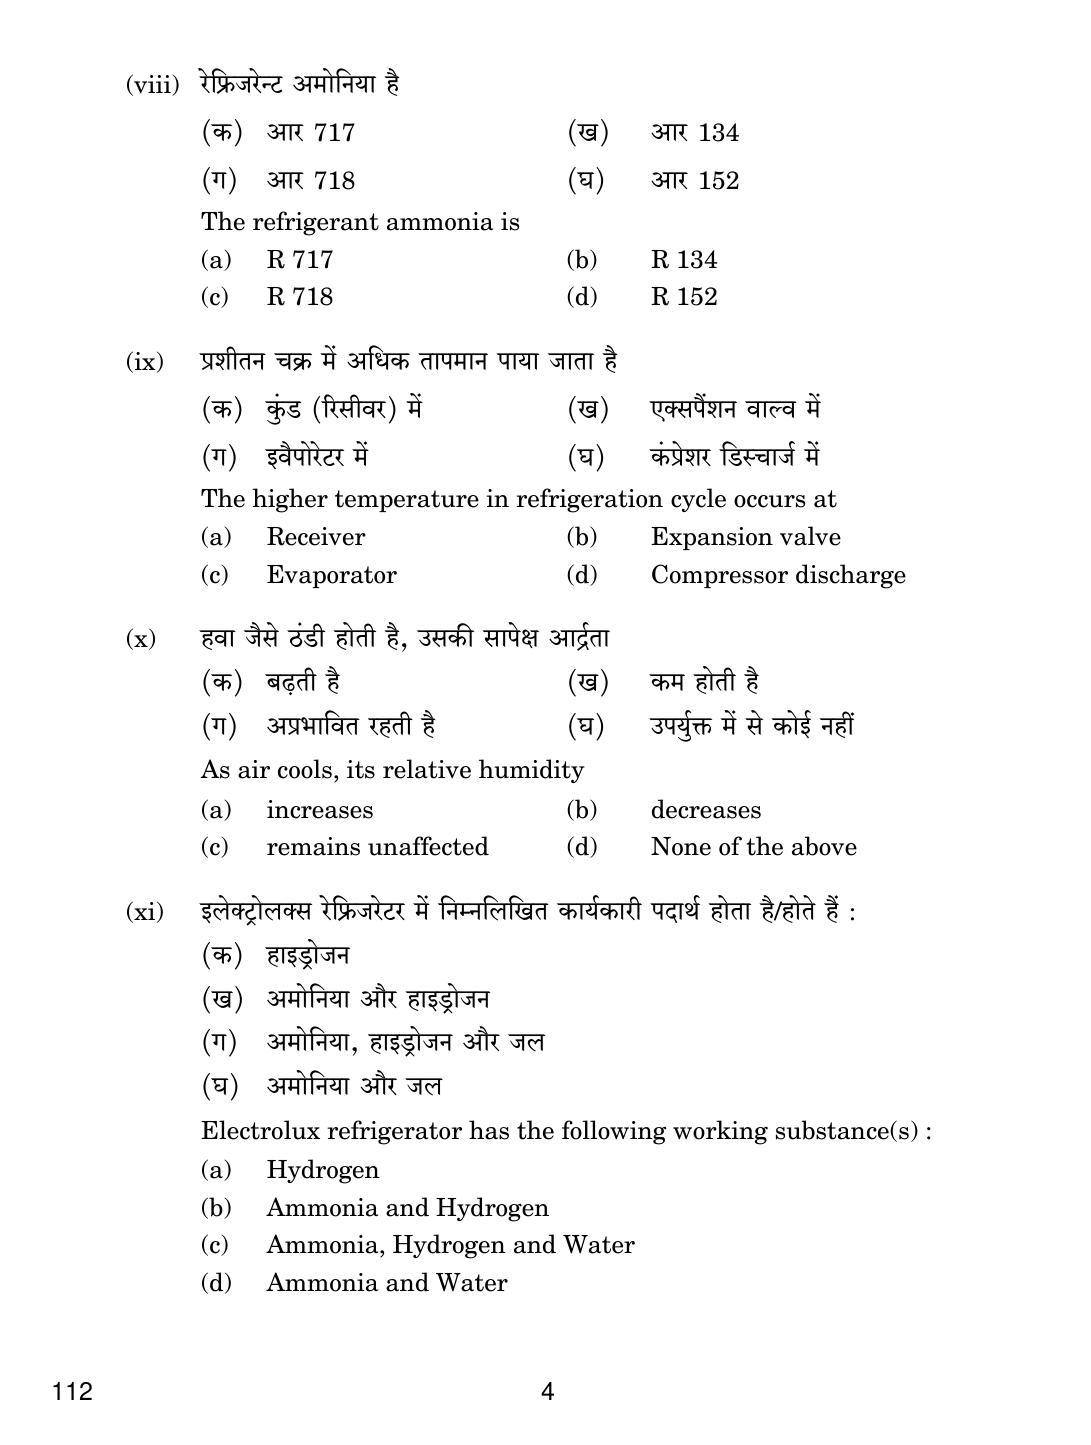 CBSE Class 12 112 Air-Conditioning And Refrigeration-III 2019 Question Paper - Page 4